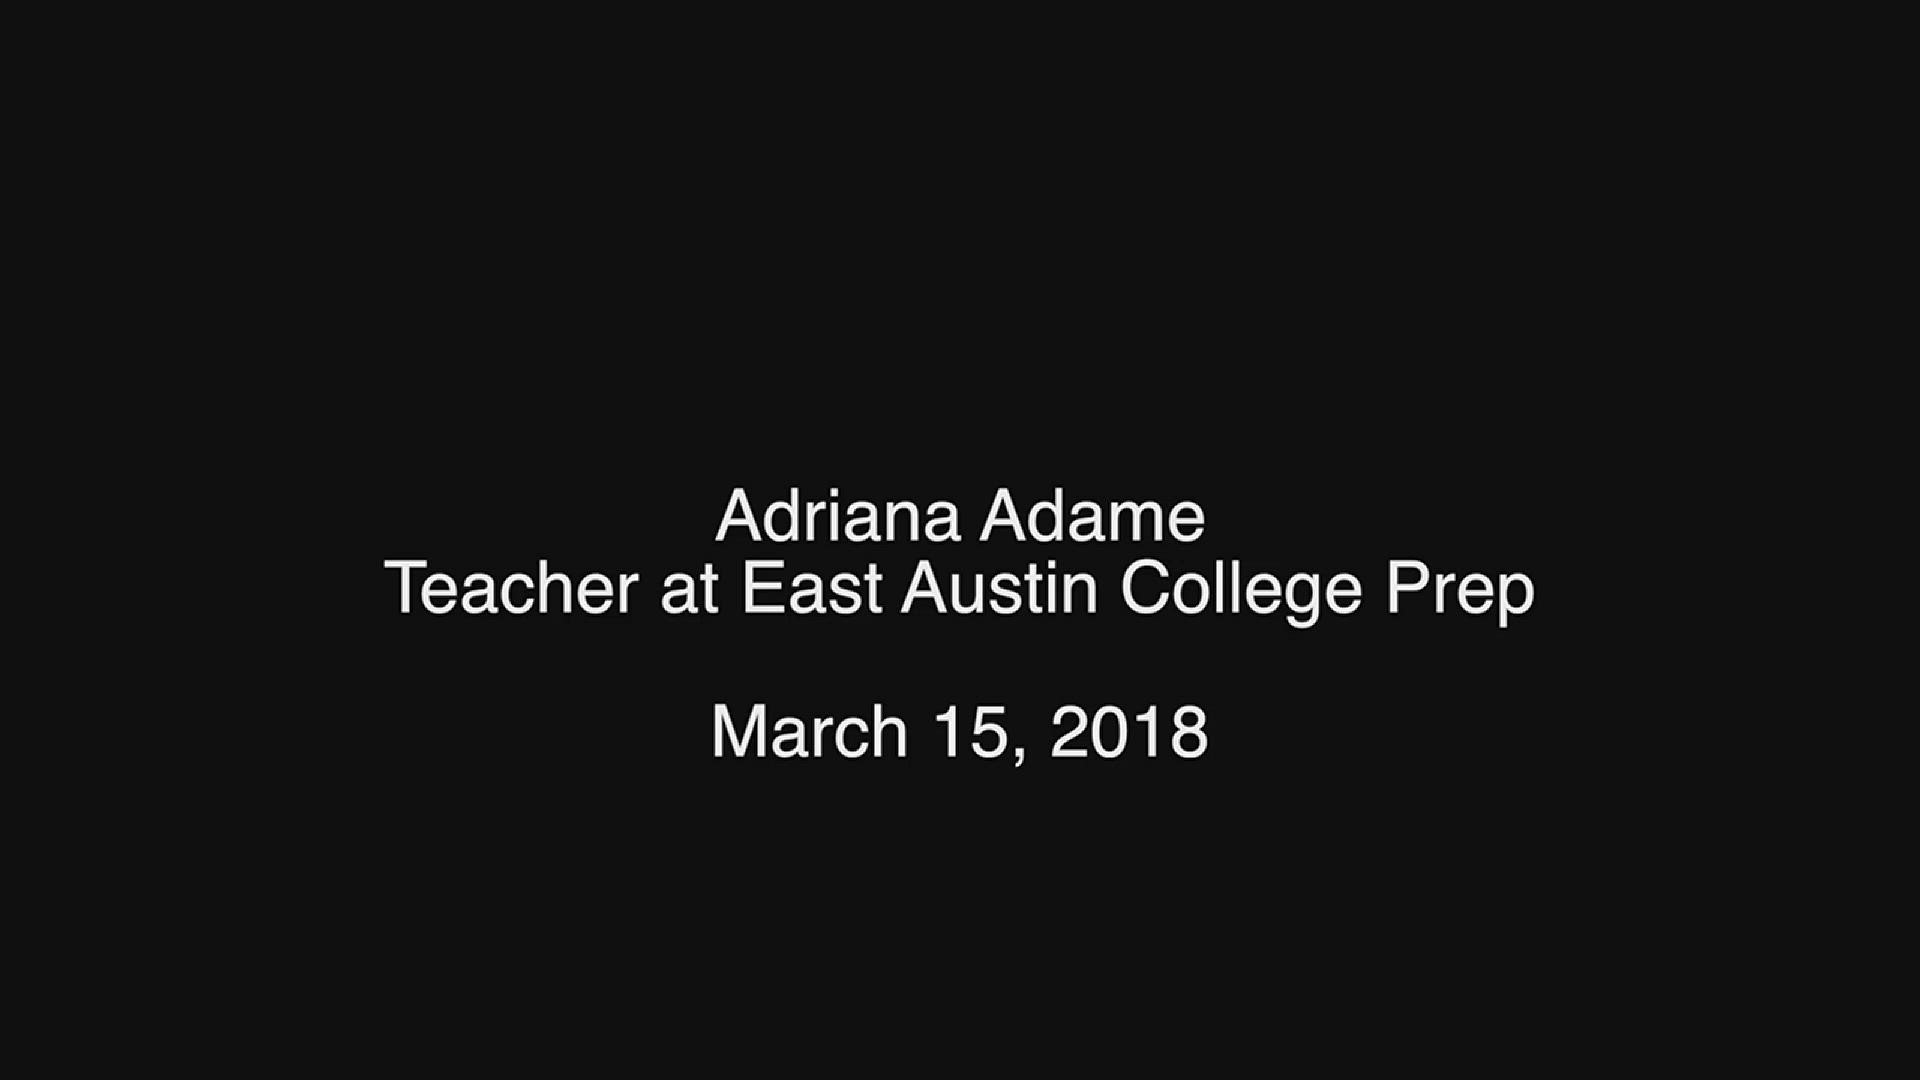 Adriana Adame talks about her thoughts and memories with Draylen Mason